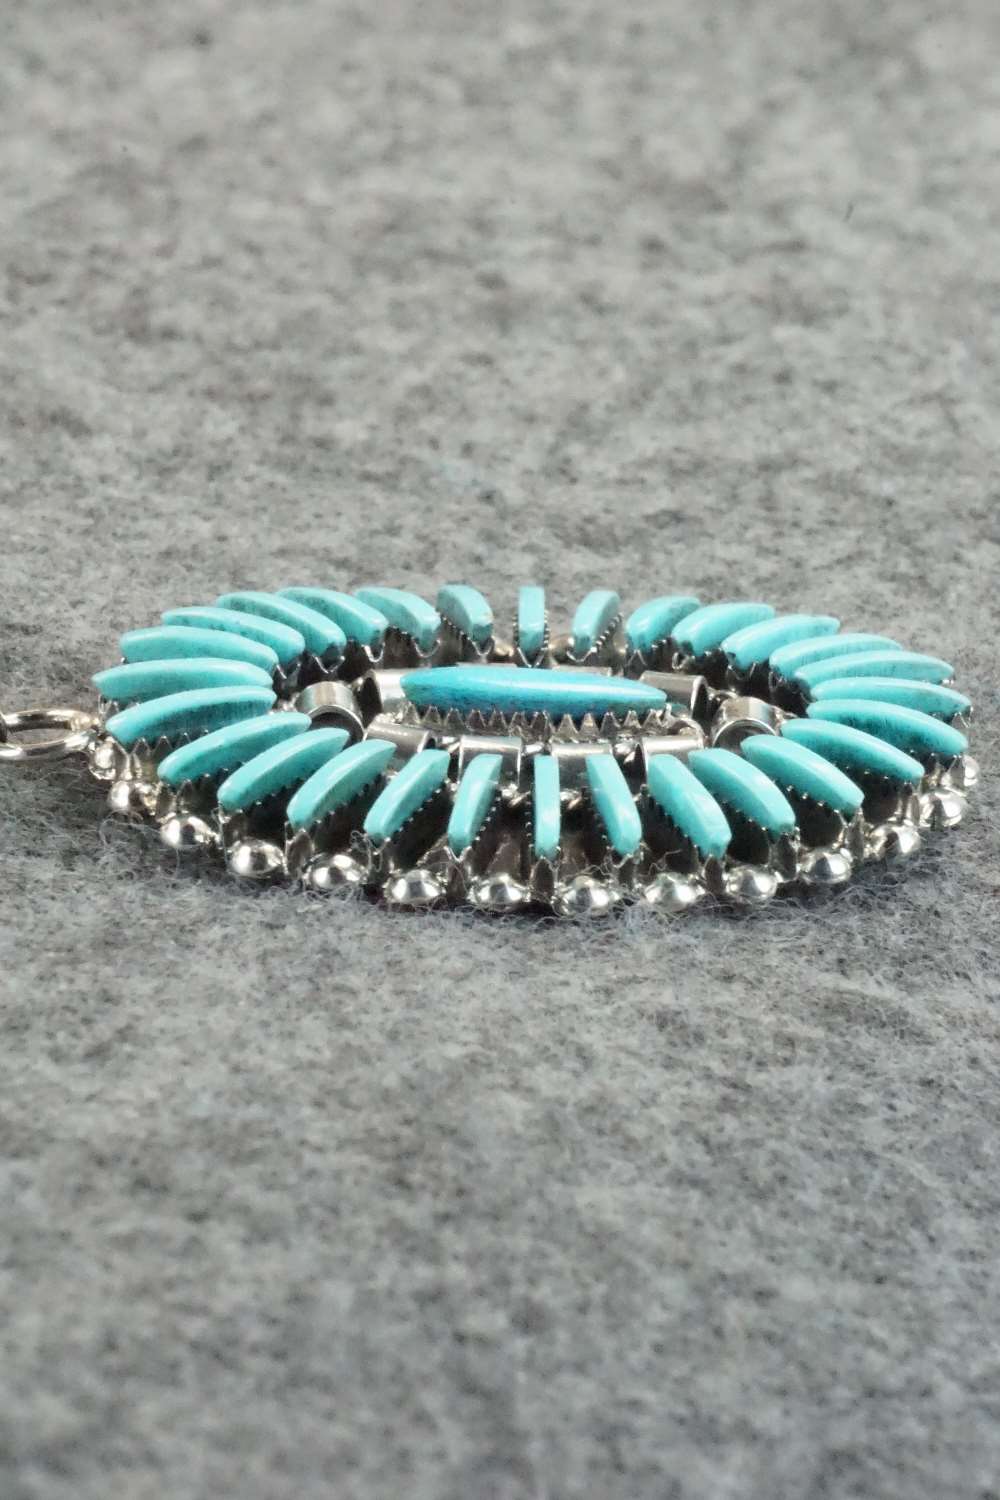 Turquoise & Sterling Silver Pendant - Barton Cooeyate